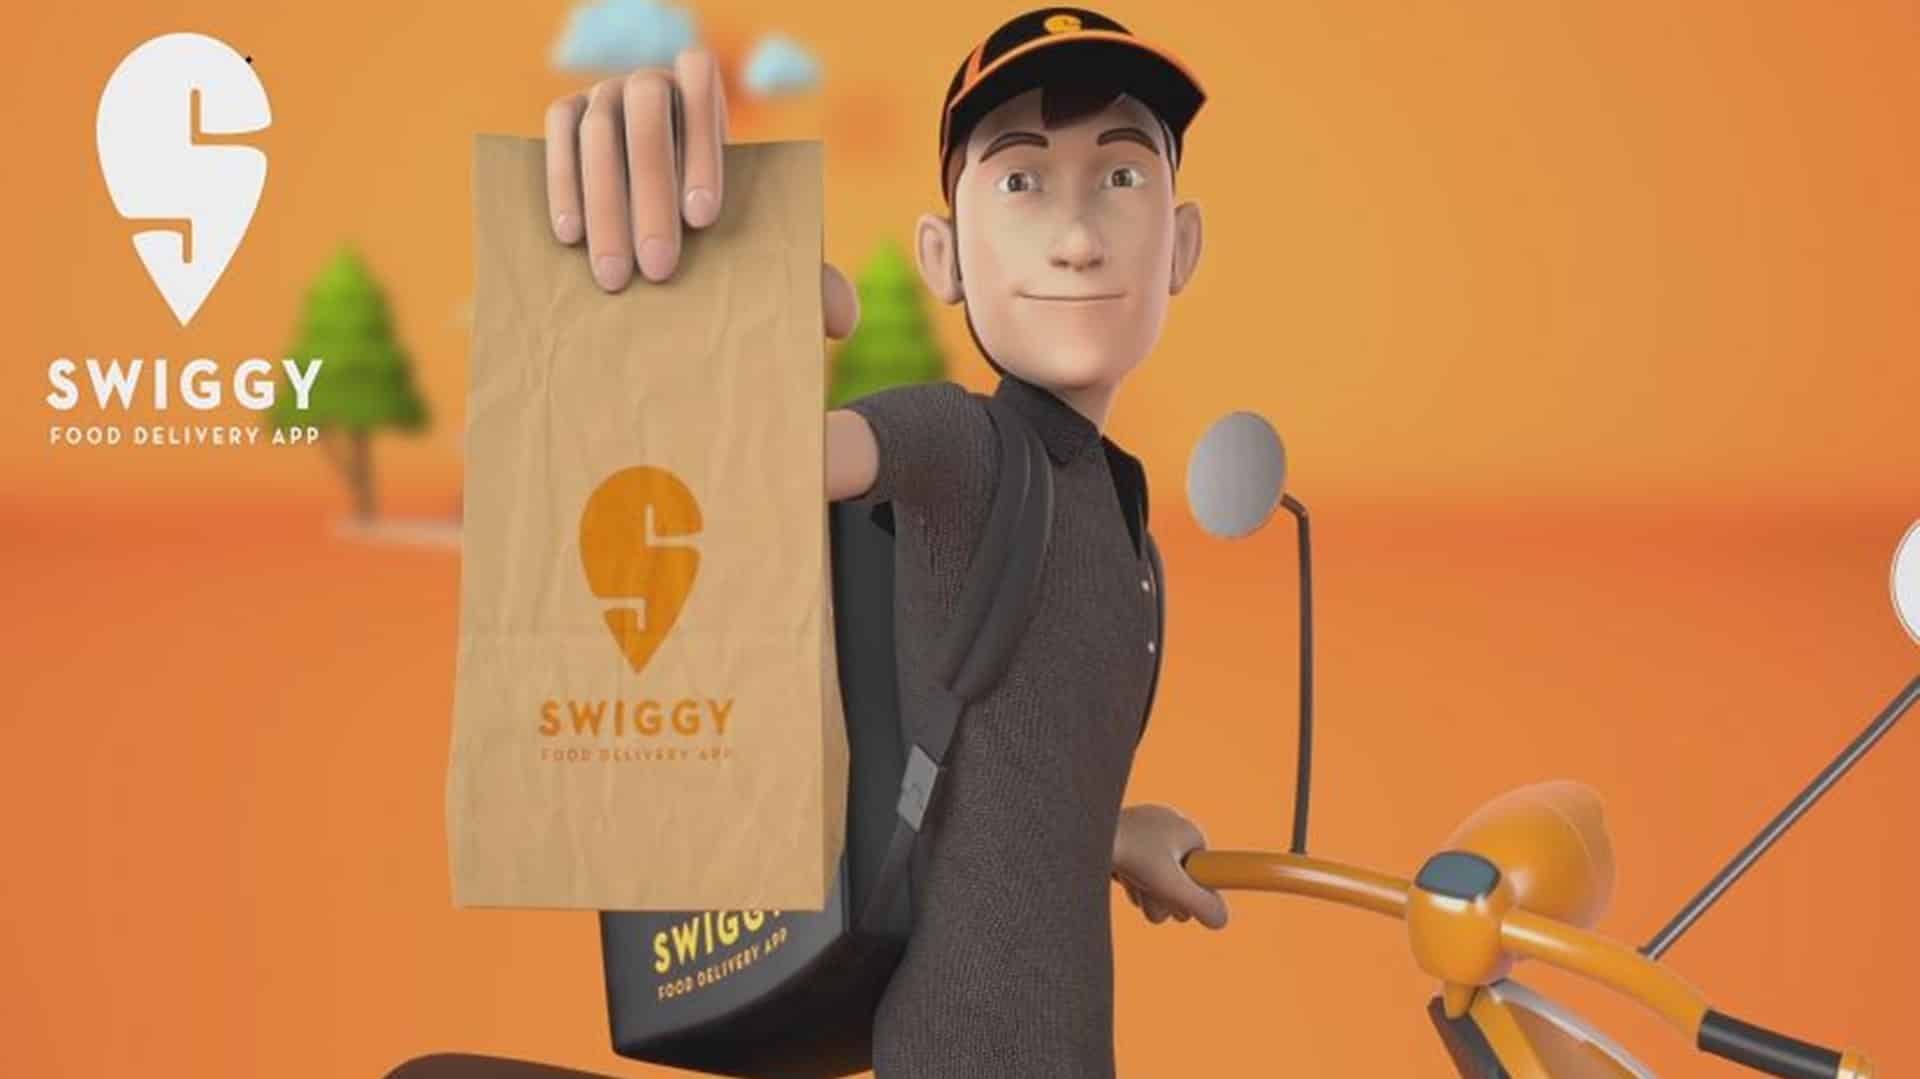 A Swiggy IPO could deliver good returns, says SoftBank founder after Zomato's stellar show